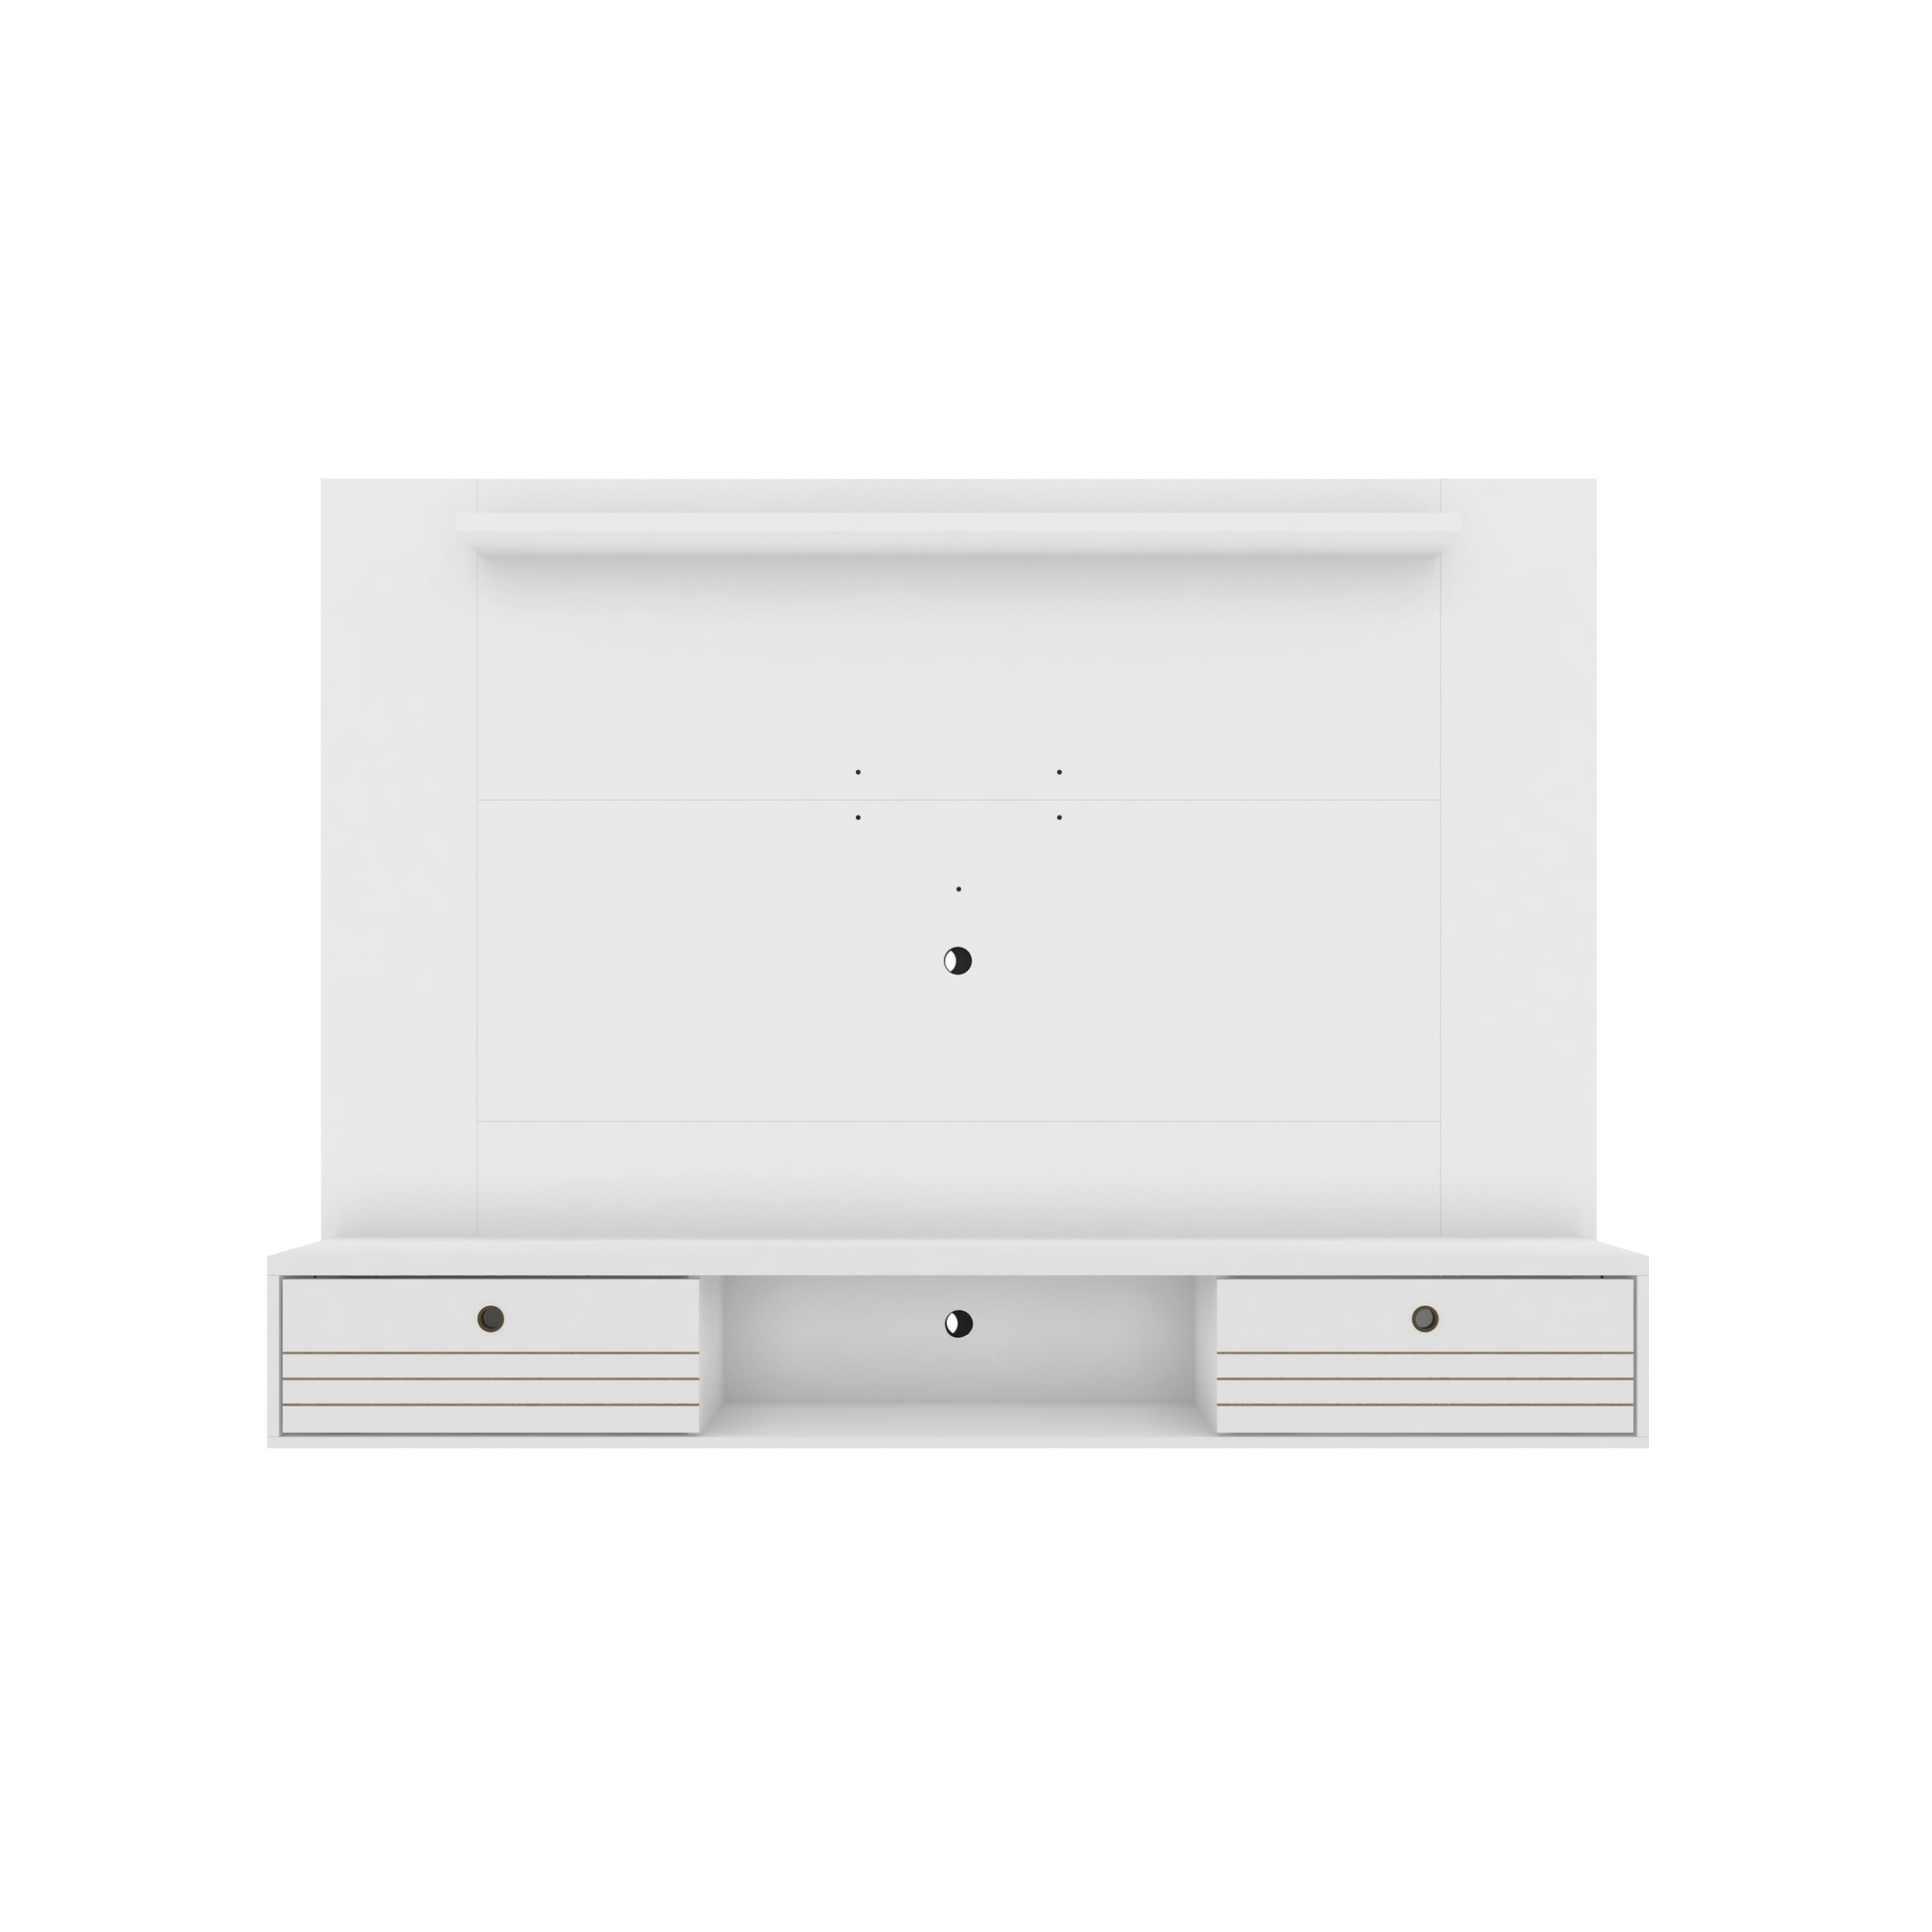 Manhattan Comfort, Liberty 70.86 Floating Wall Ent Cntr White, Width 70.86 in, Height 52.95 in, Depth 12.99 in, Model 235BMC